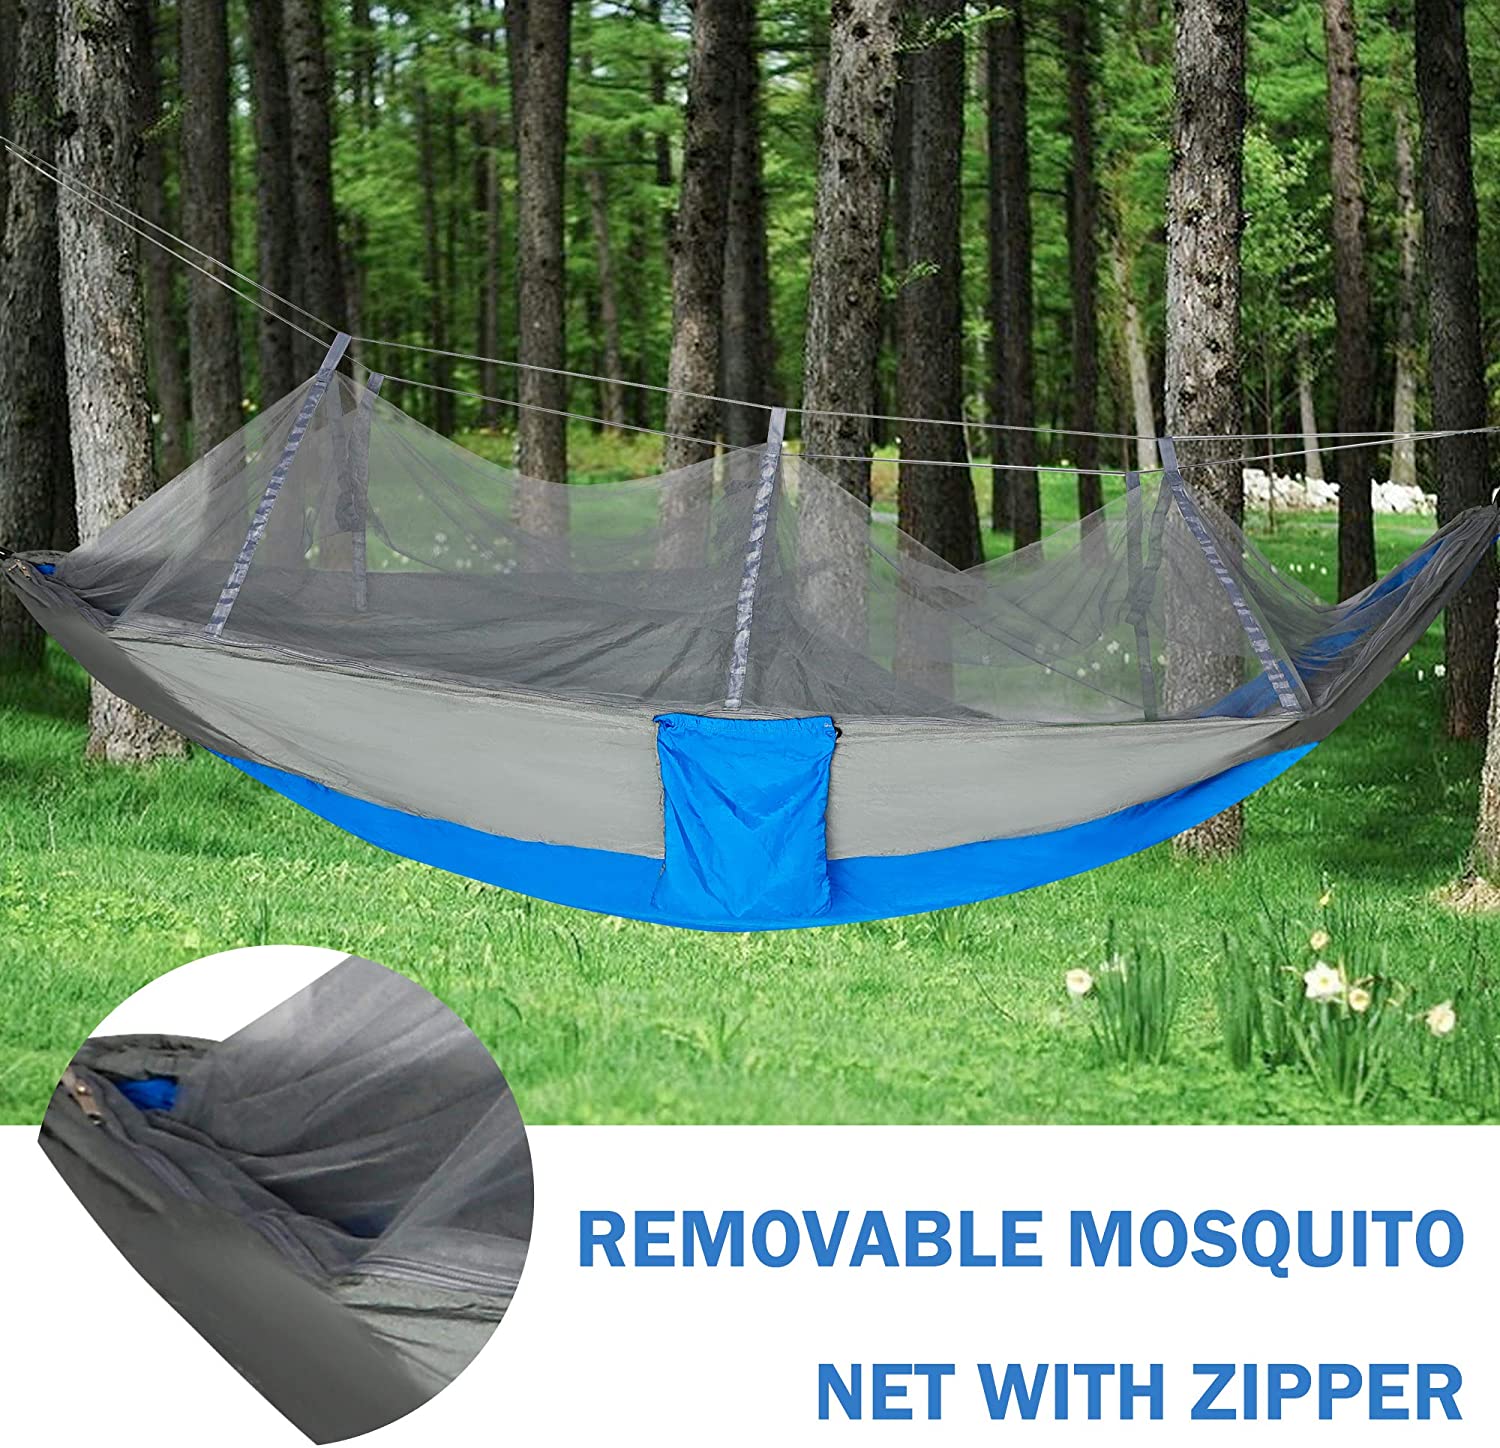 KARMAS PRODUCT Camping Hammock with Mosquito Net, 8.5 ft Single Portable Lightweight Nylon Hammocks with 2 Adjustable Tree Straps for Backpacking, Travel, Beach, Backyard,Hiking (Blue/Gray)